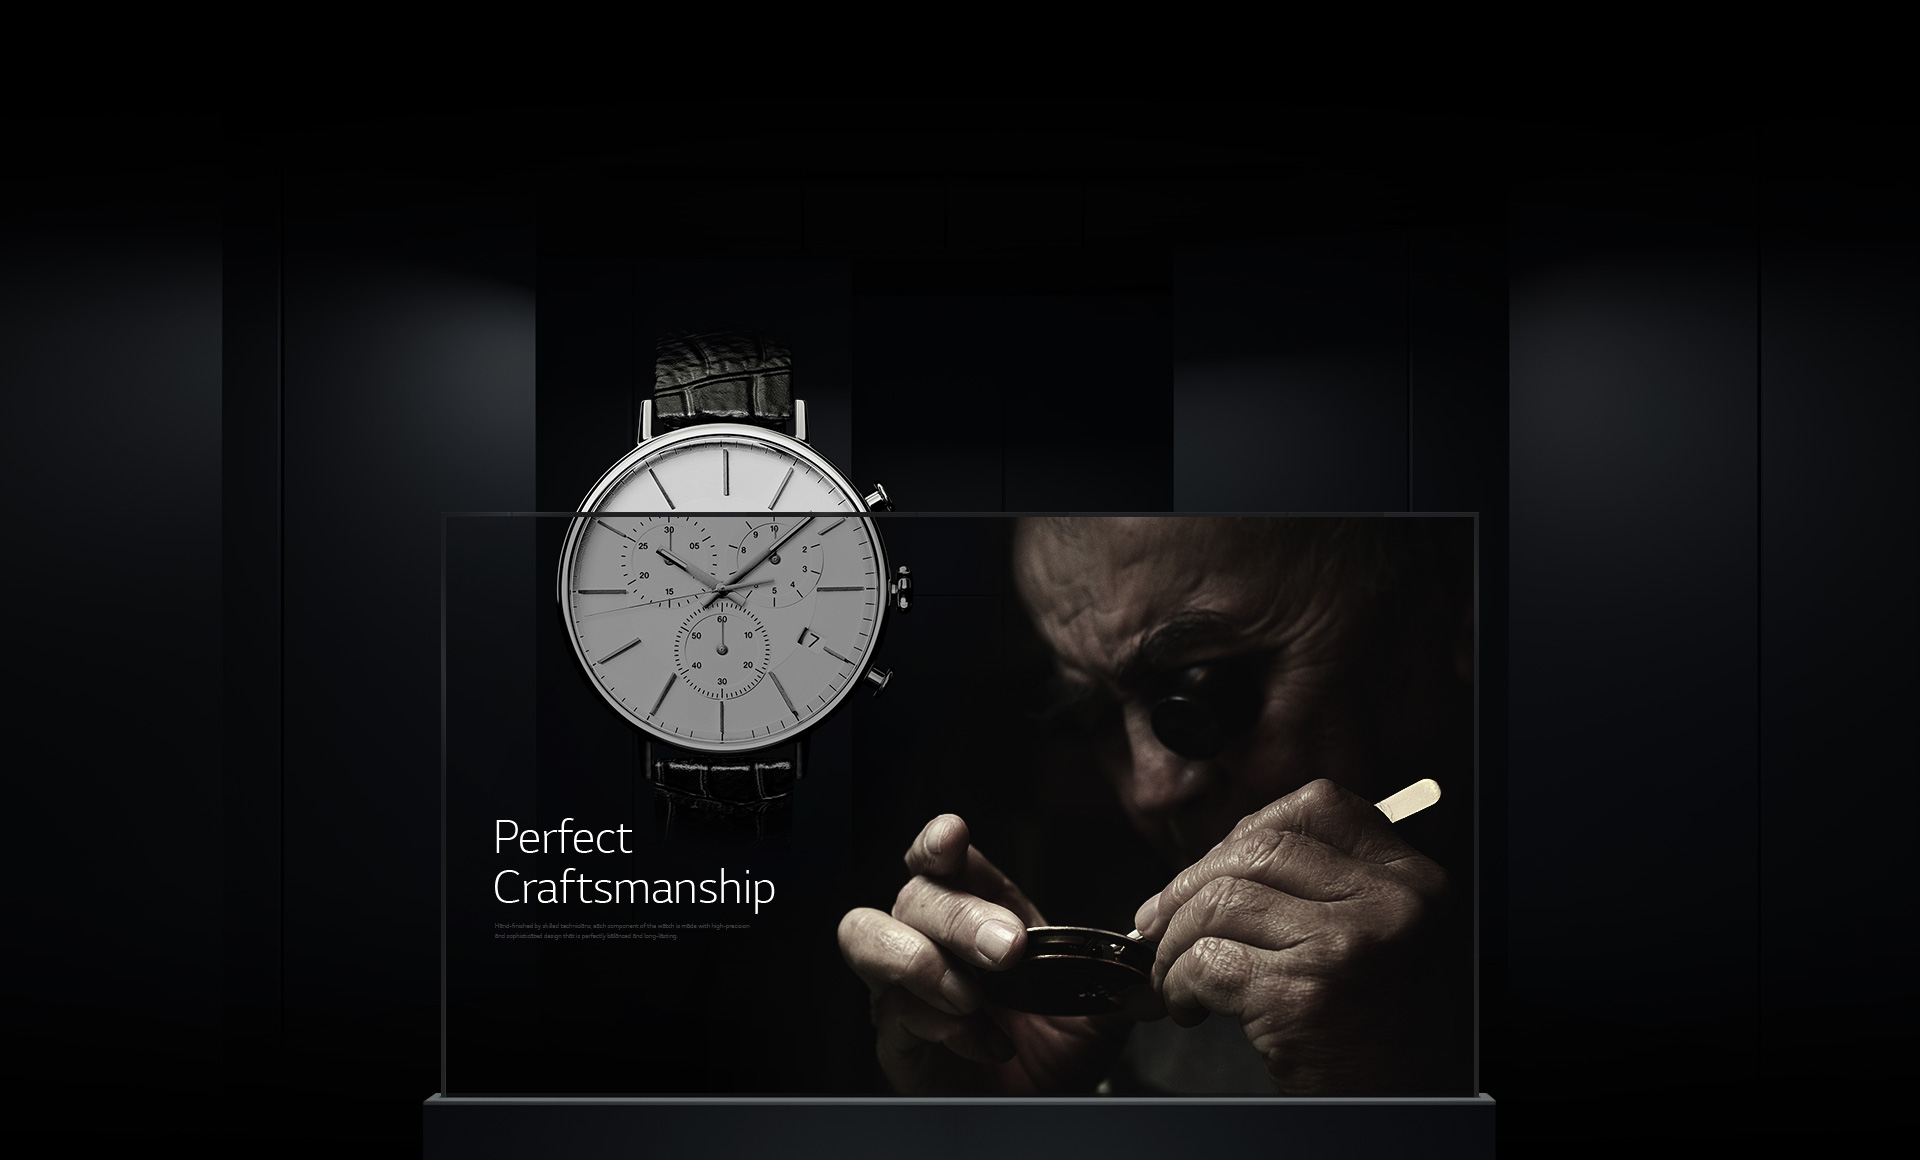 A professional craftsman displayed on a single Transparent OLED signage overlaid with a luxurious watch image in the background.